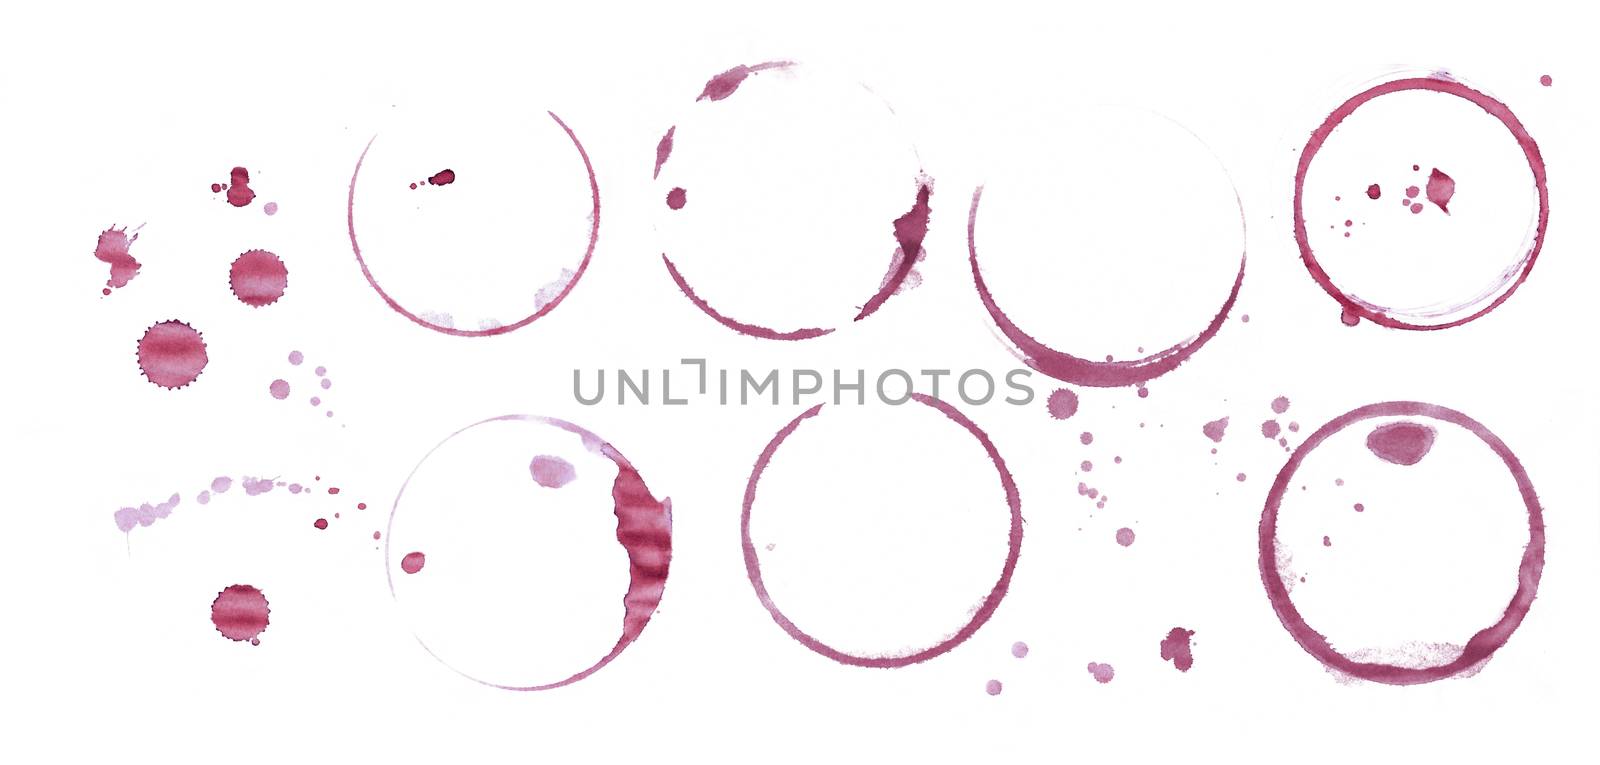 Red wine stain rings isolated on white background by BreakingTheWalls